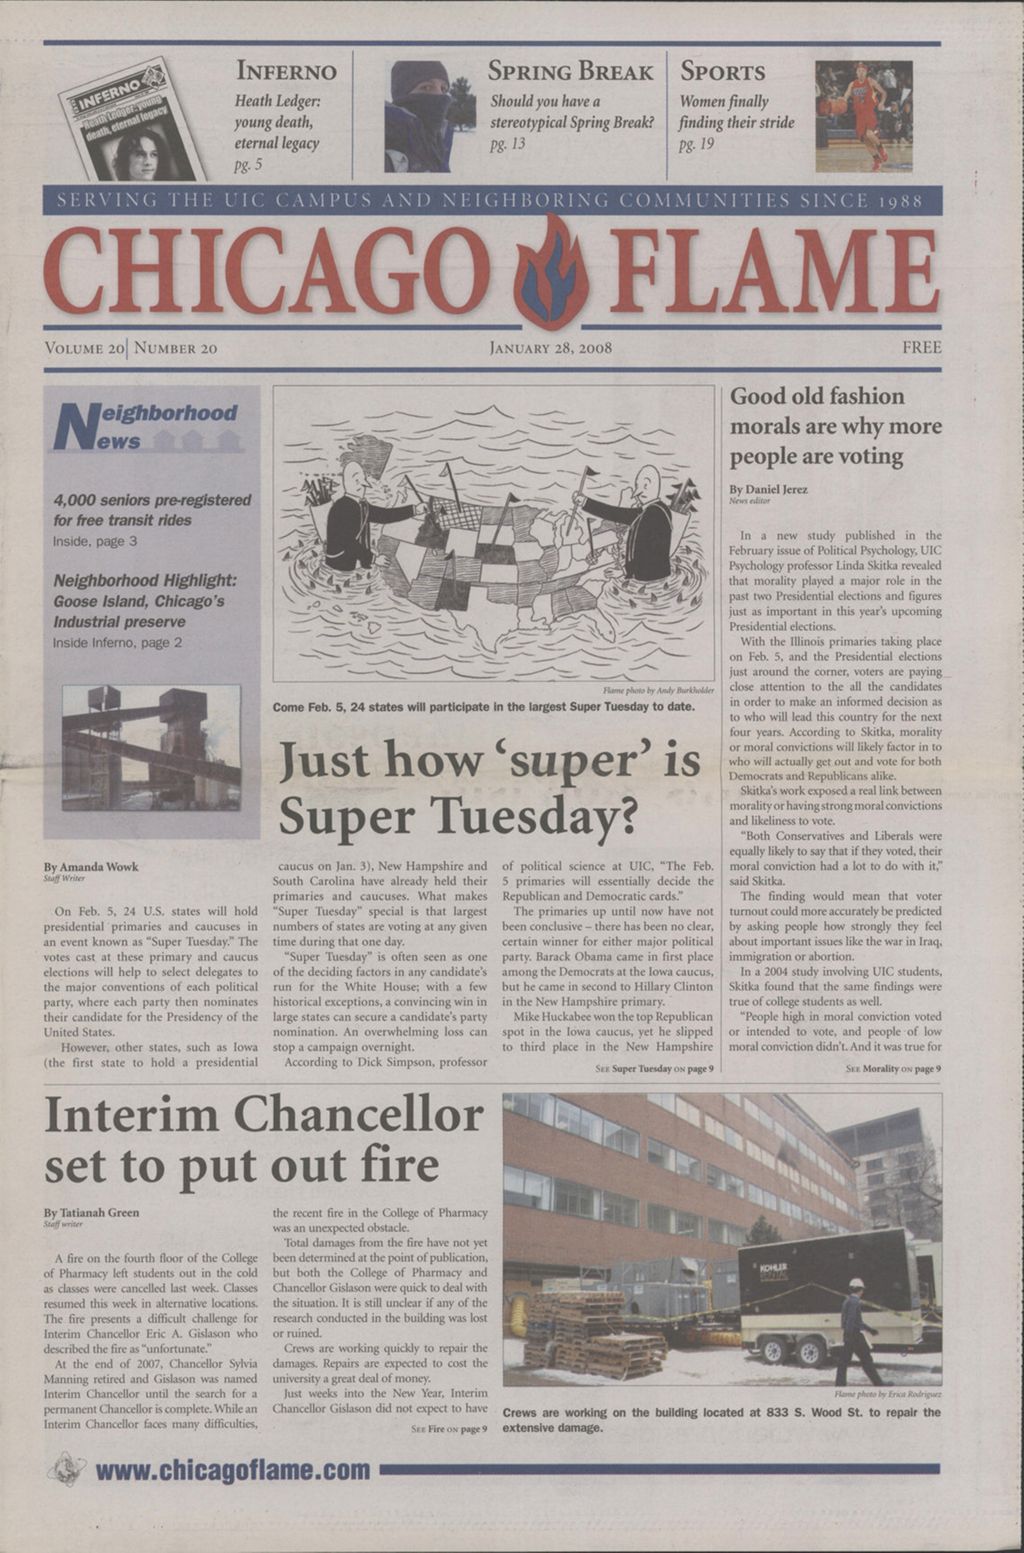 Chicago Flame (January 28, 2008)